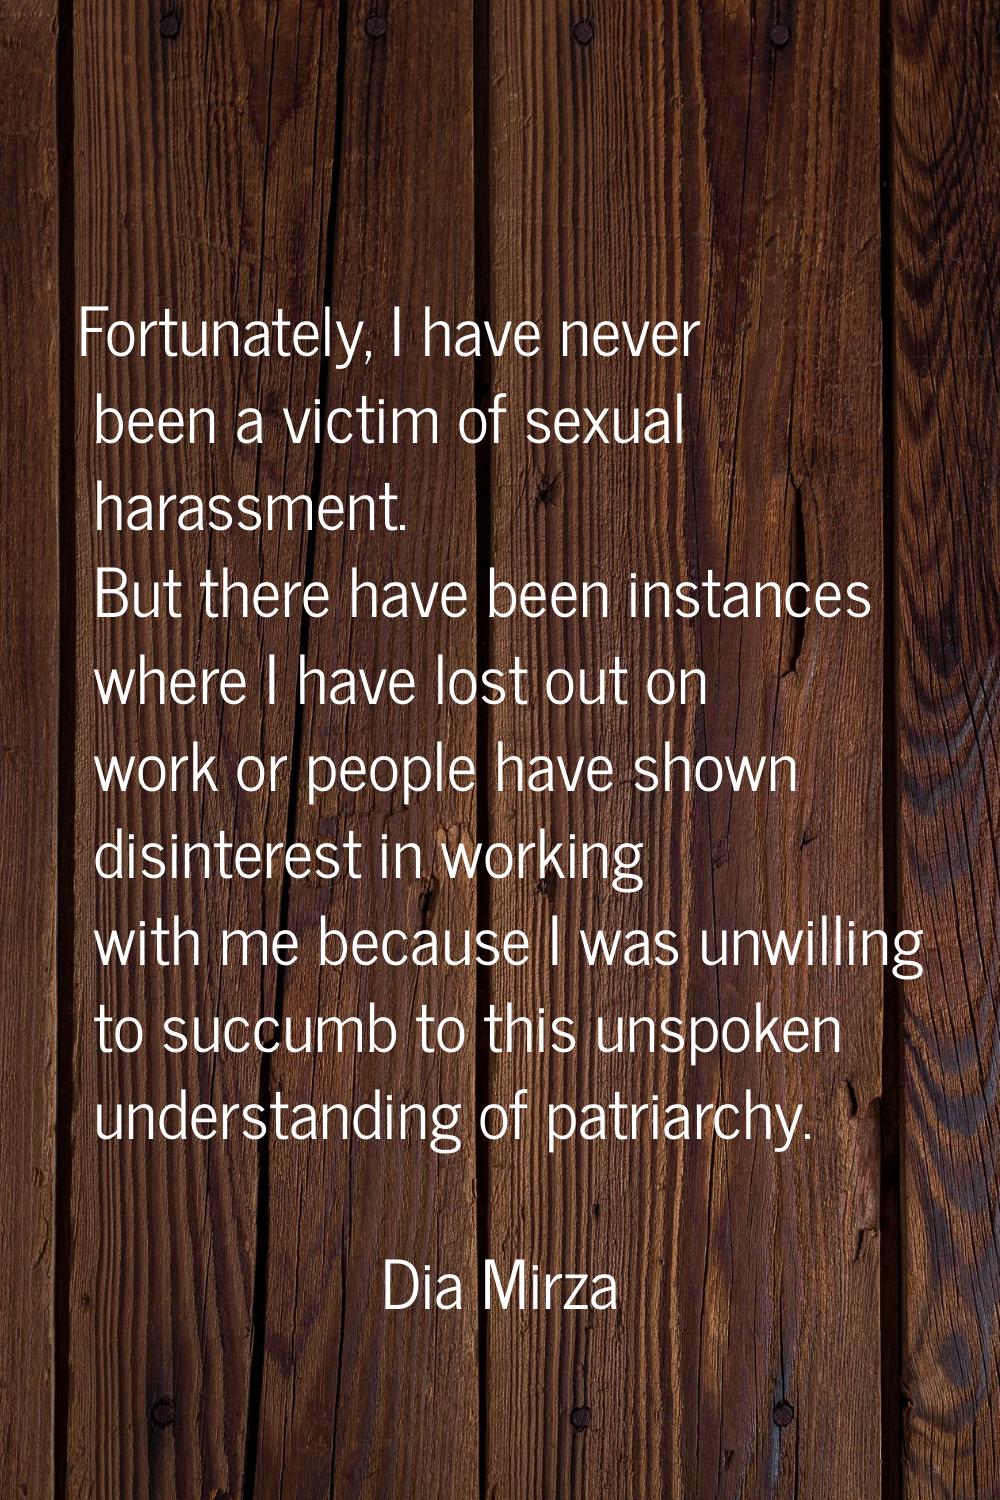 Fortunately, I have never been a victim of sexual harassment. But there have been instances where I